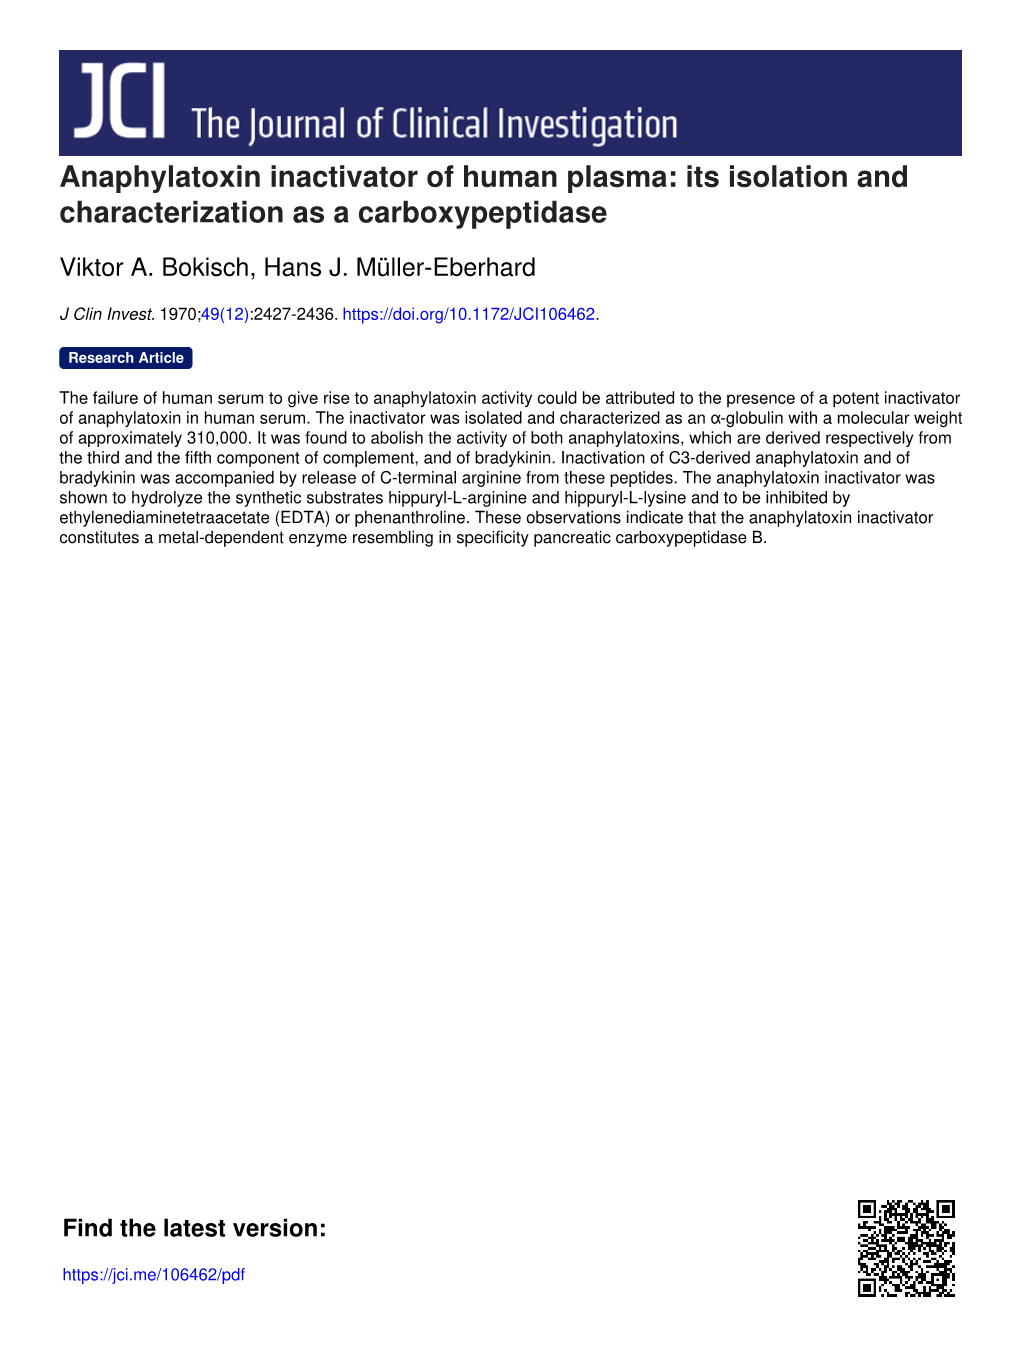 Anaphylatoxin Inactivator of Human Plasma: Its Isolation and Characterization As a Carboxypeptidase